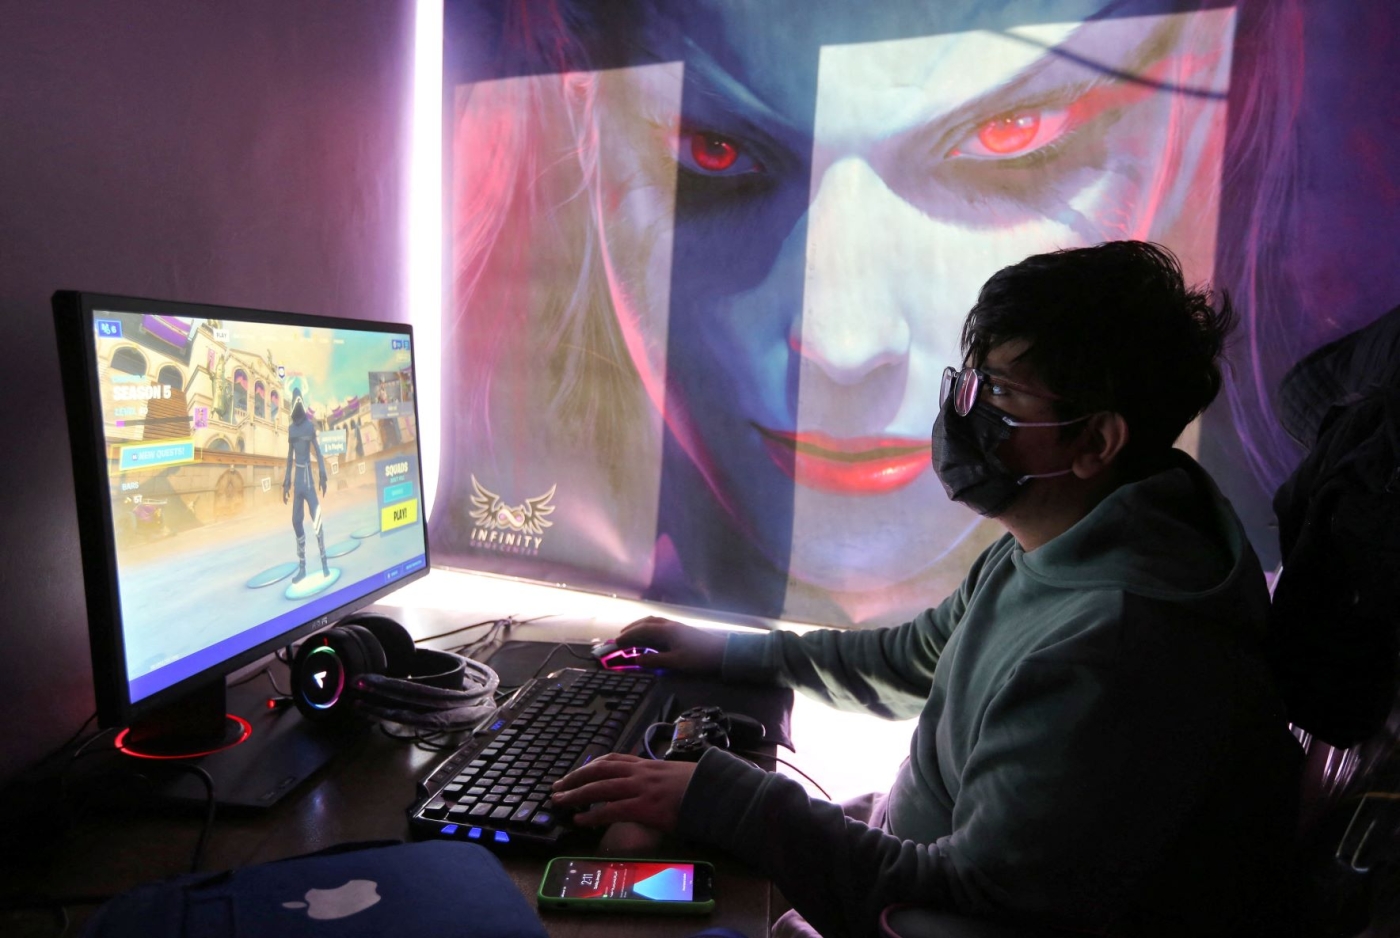 A youth plays an online multiplayer game at an internet cafe in Iran's capital Tehran on January 24, 2021 (AFP)